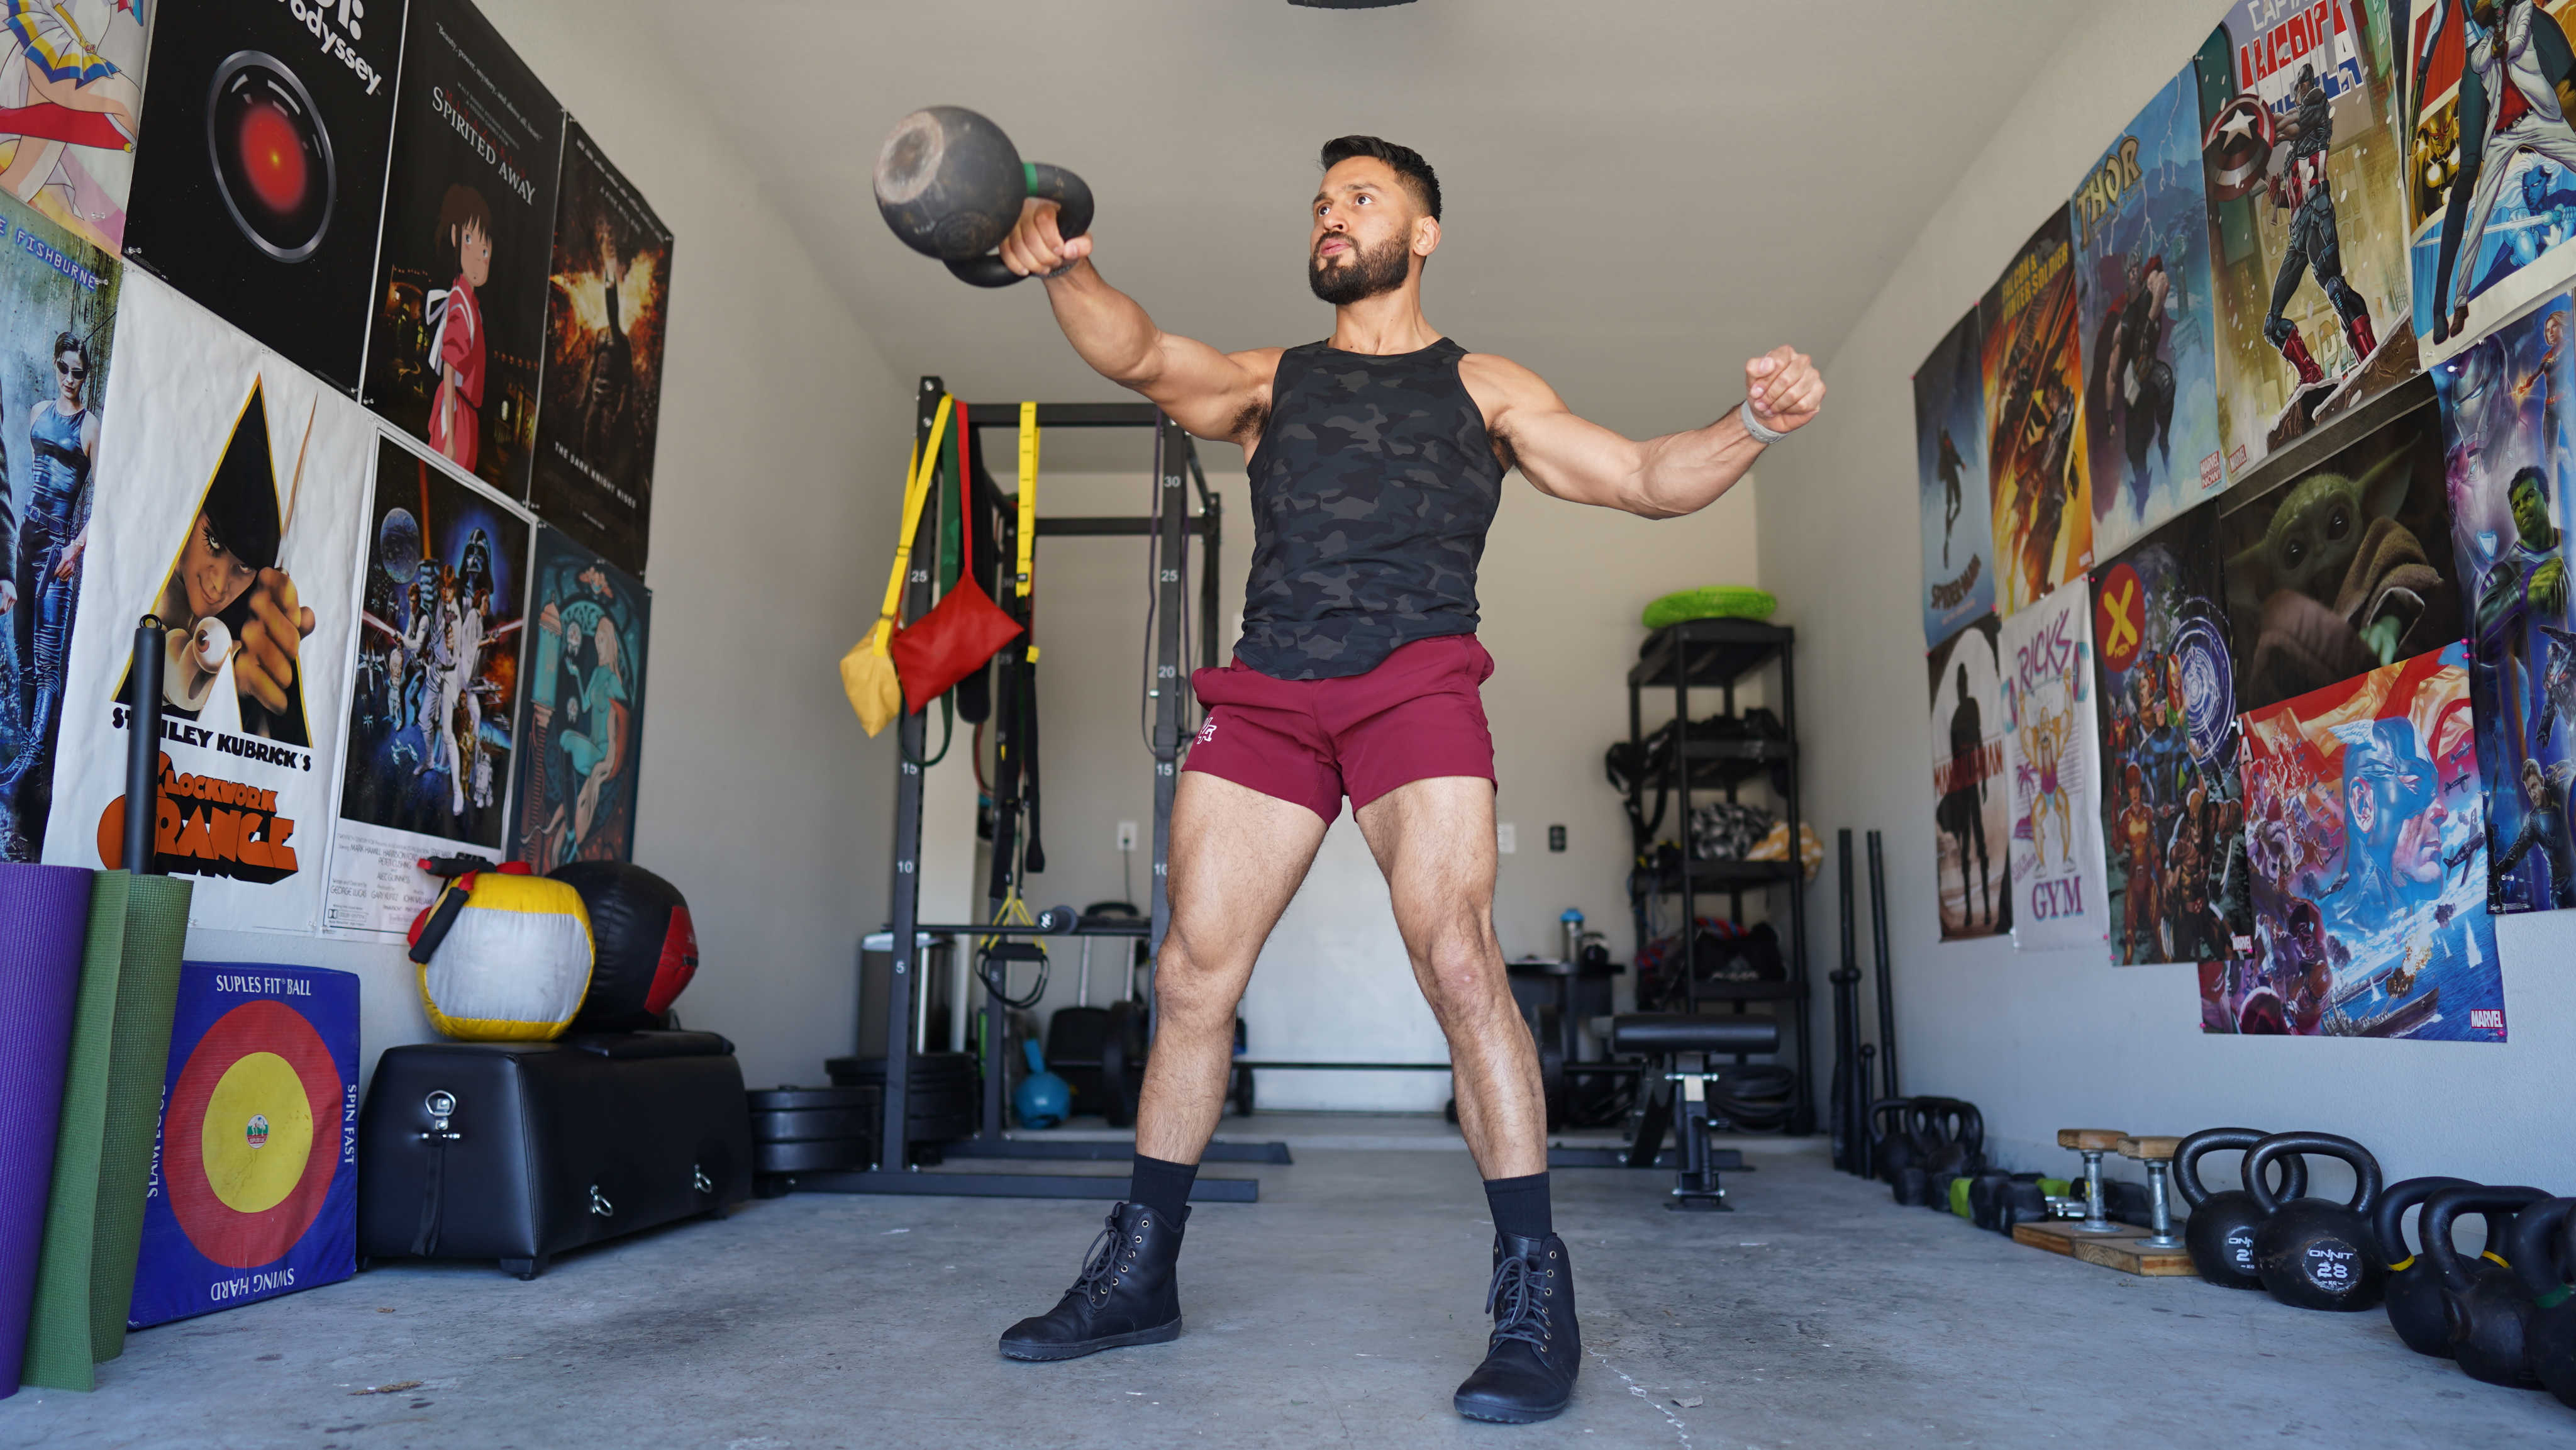 Eric does a kettlebell swing in his garage gym